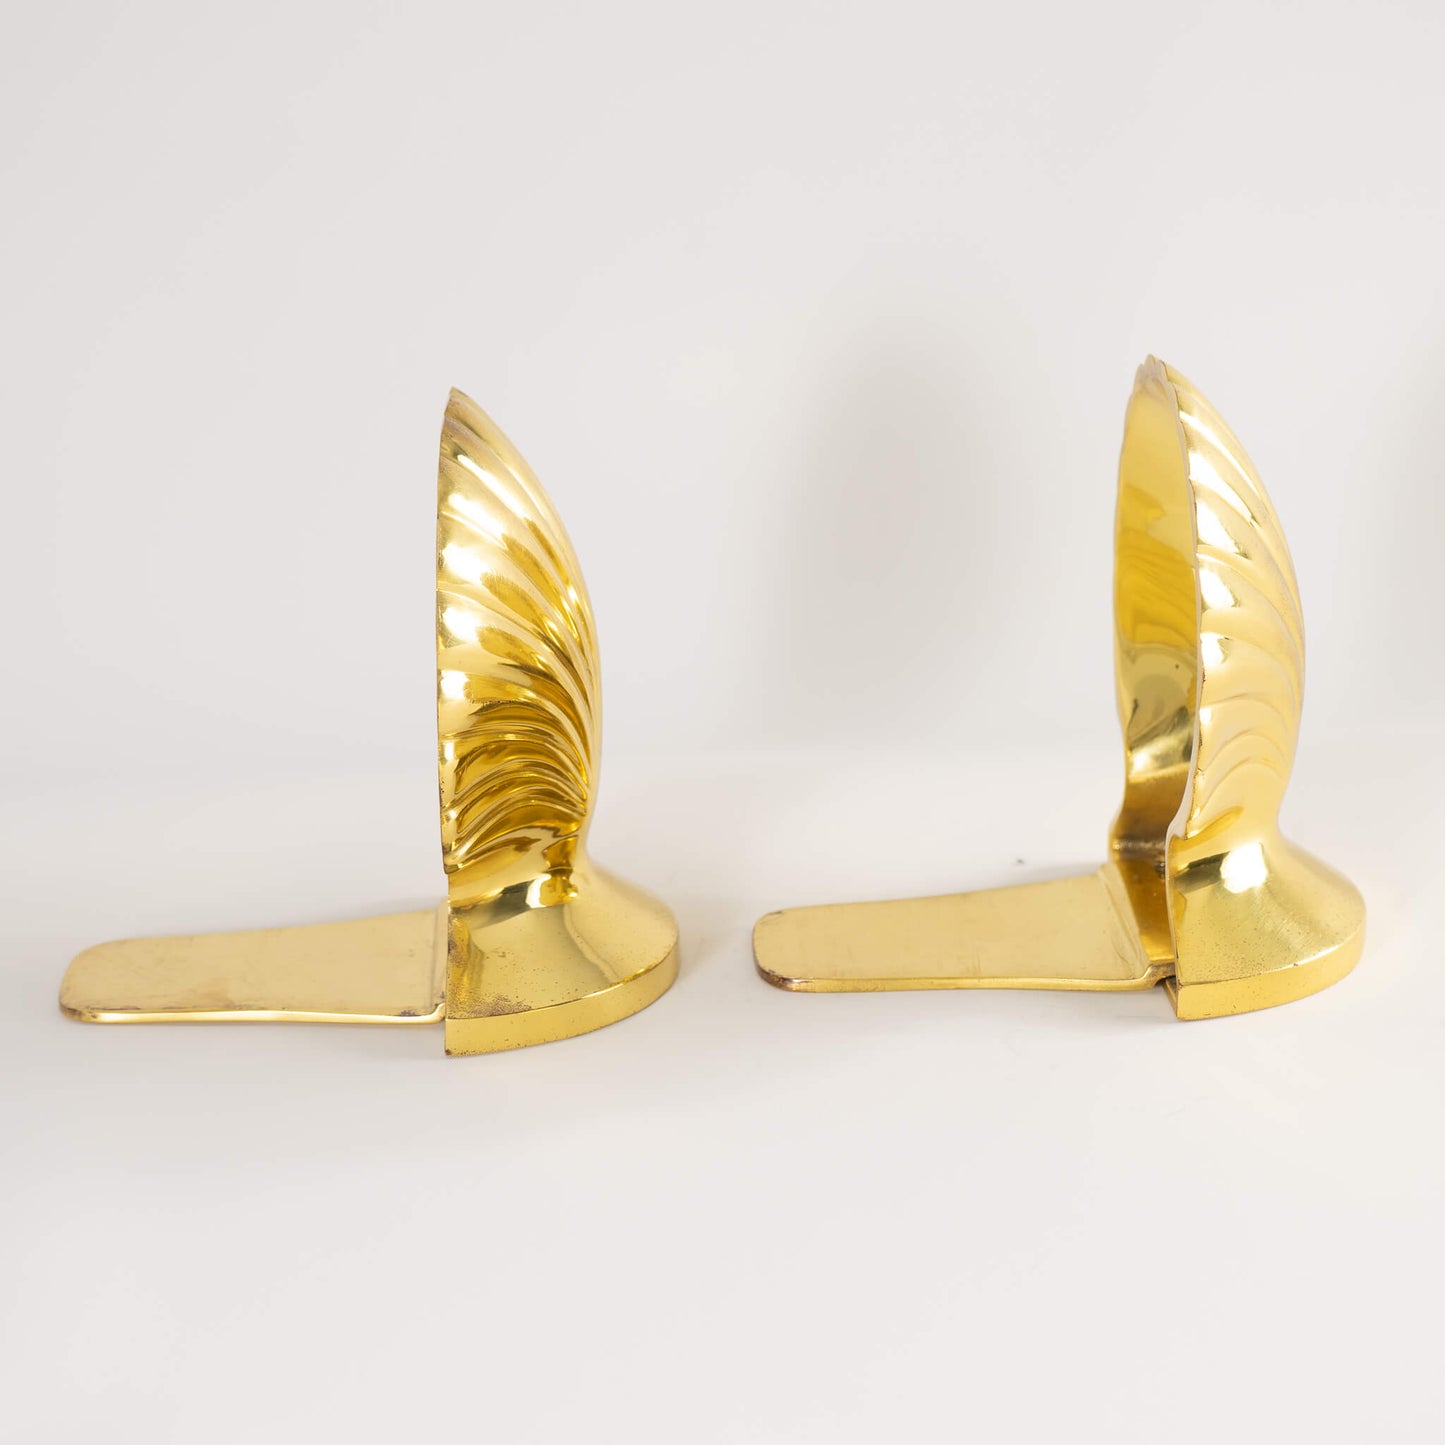 Load image into Gallery viewer, Vintage Brass Sea Shell Bookends
